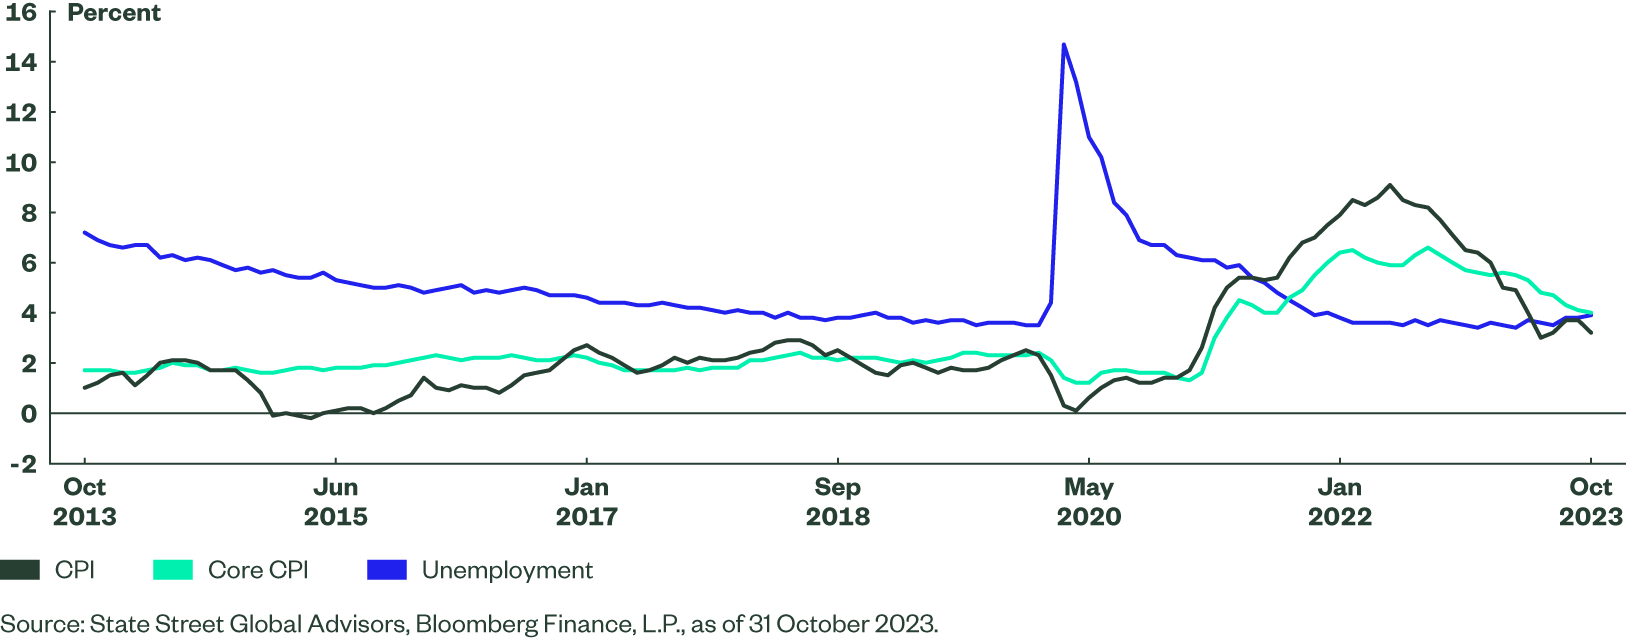 line chart showing US inflation (CPI and core CPI) and unemployment